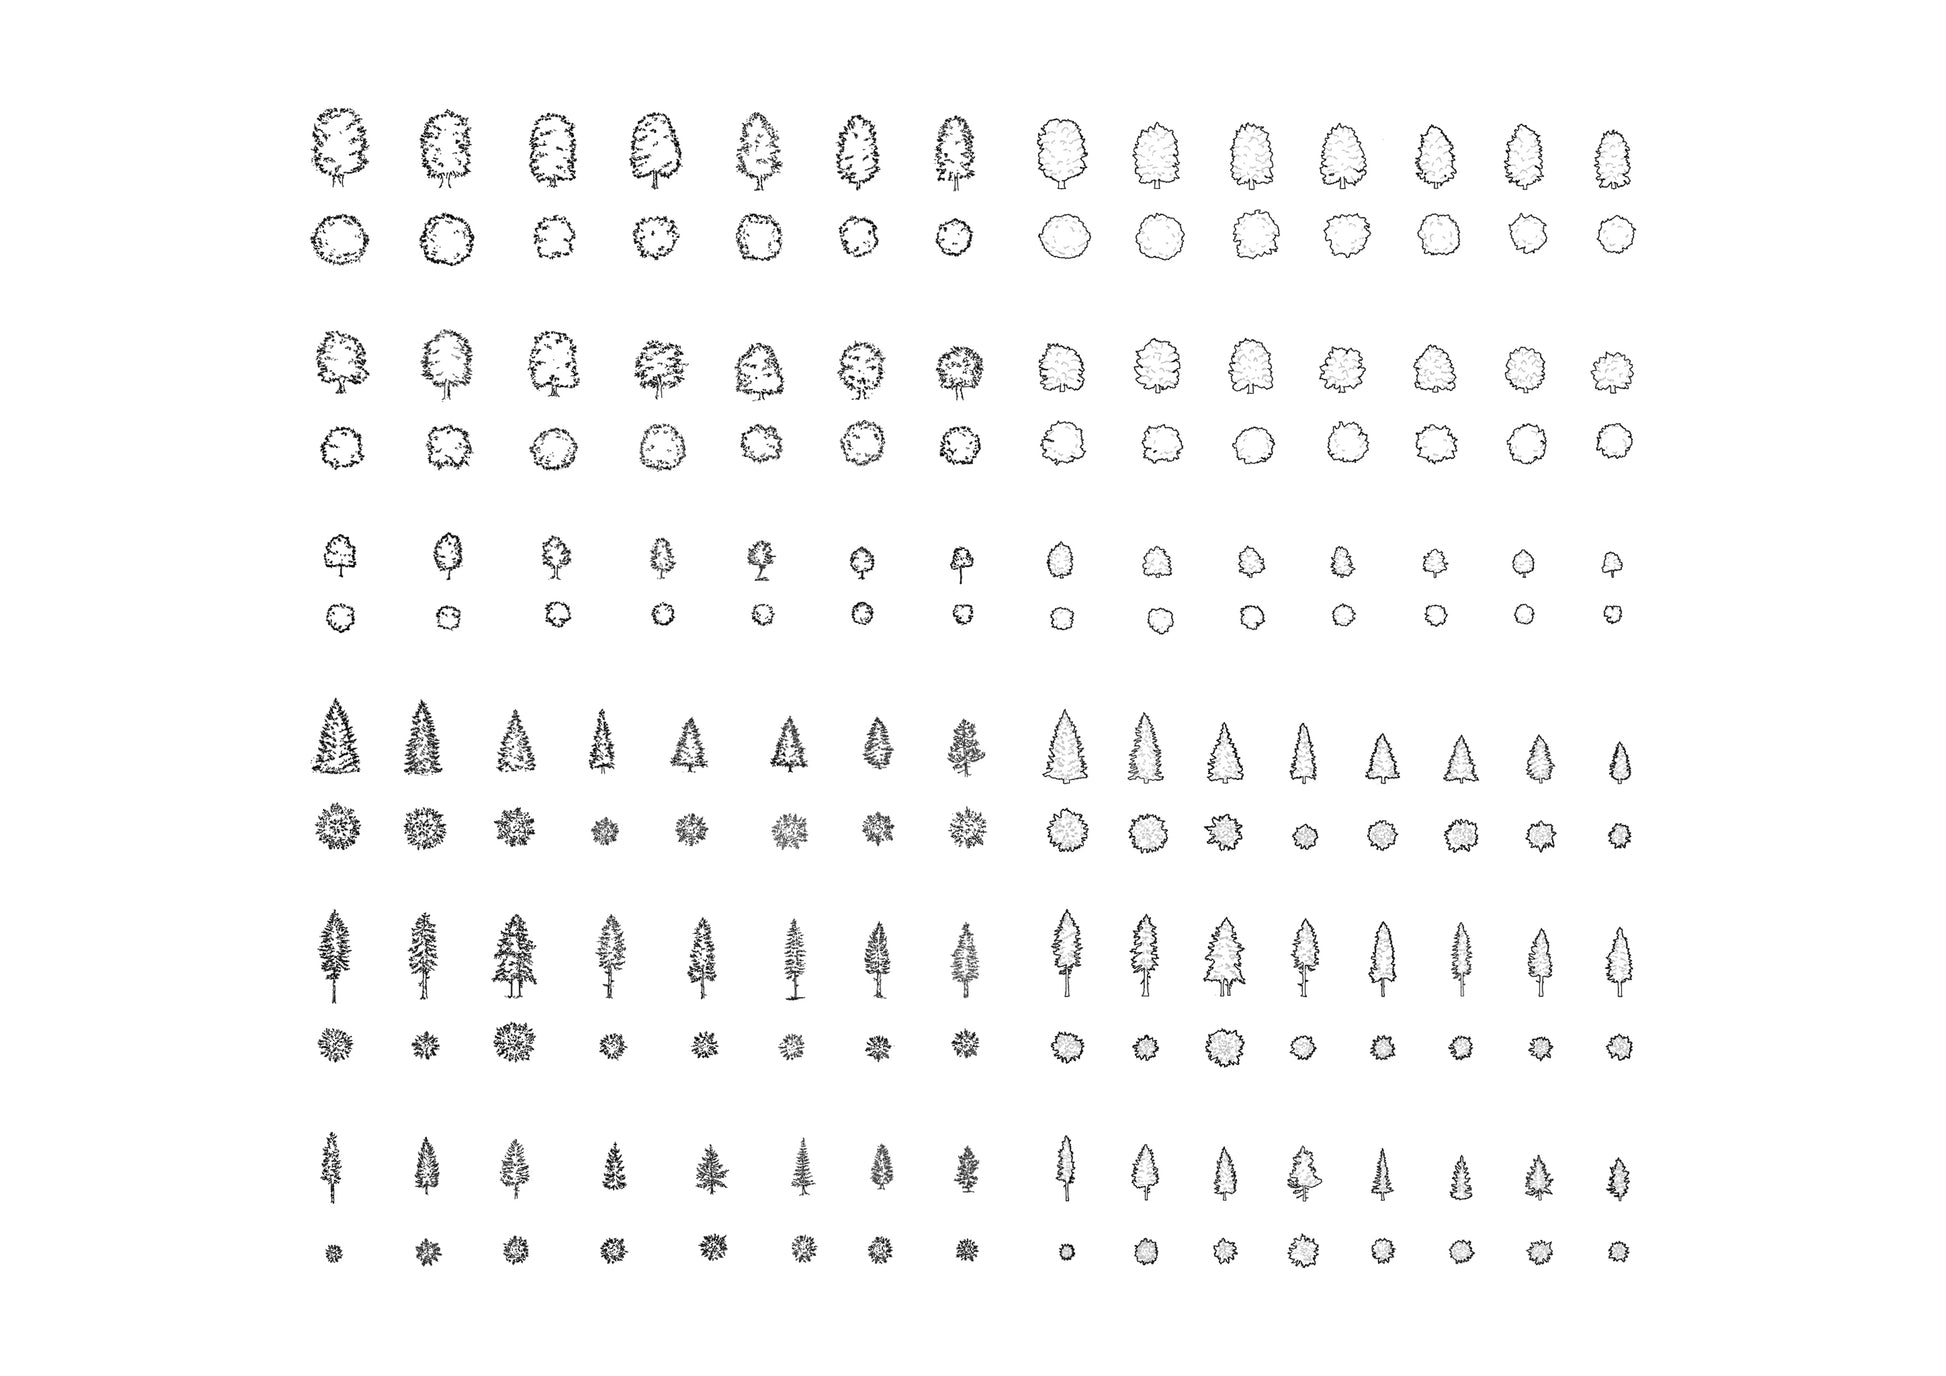 cad drawings of one-hundred trees and pine trees with silhouette-variation